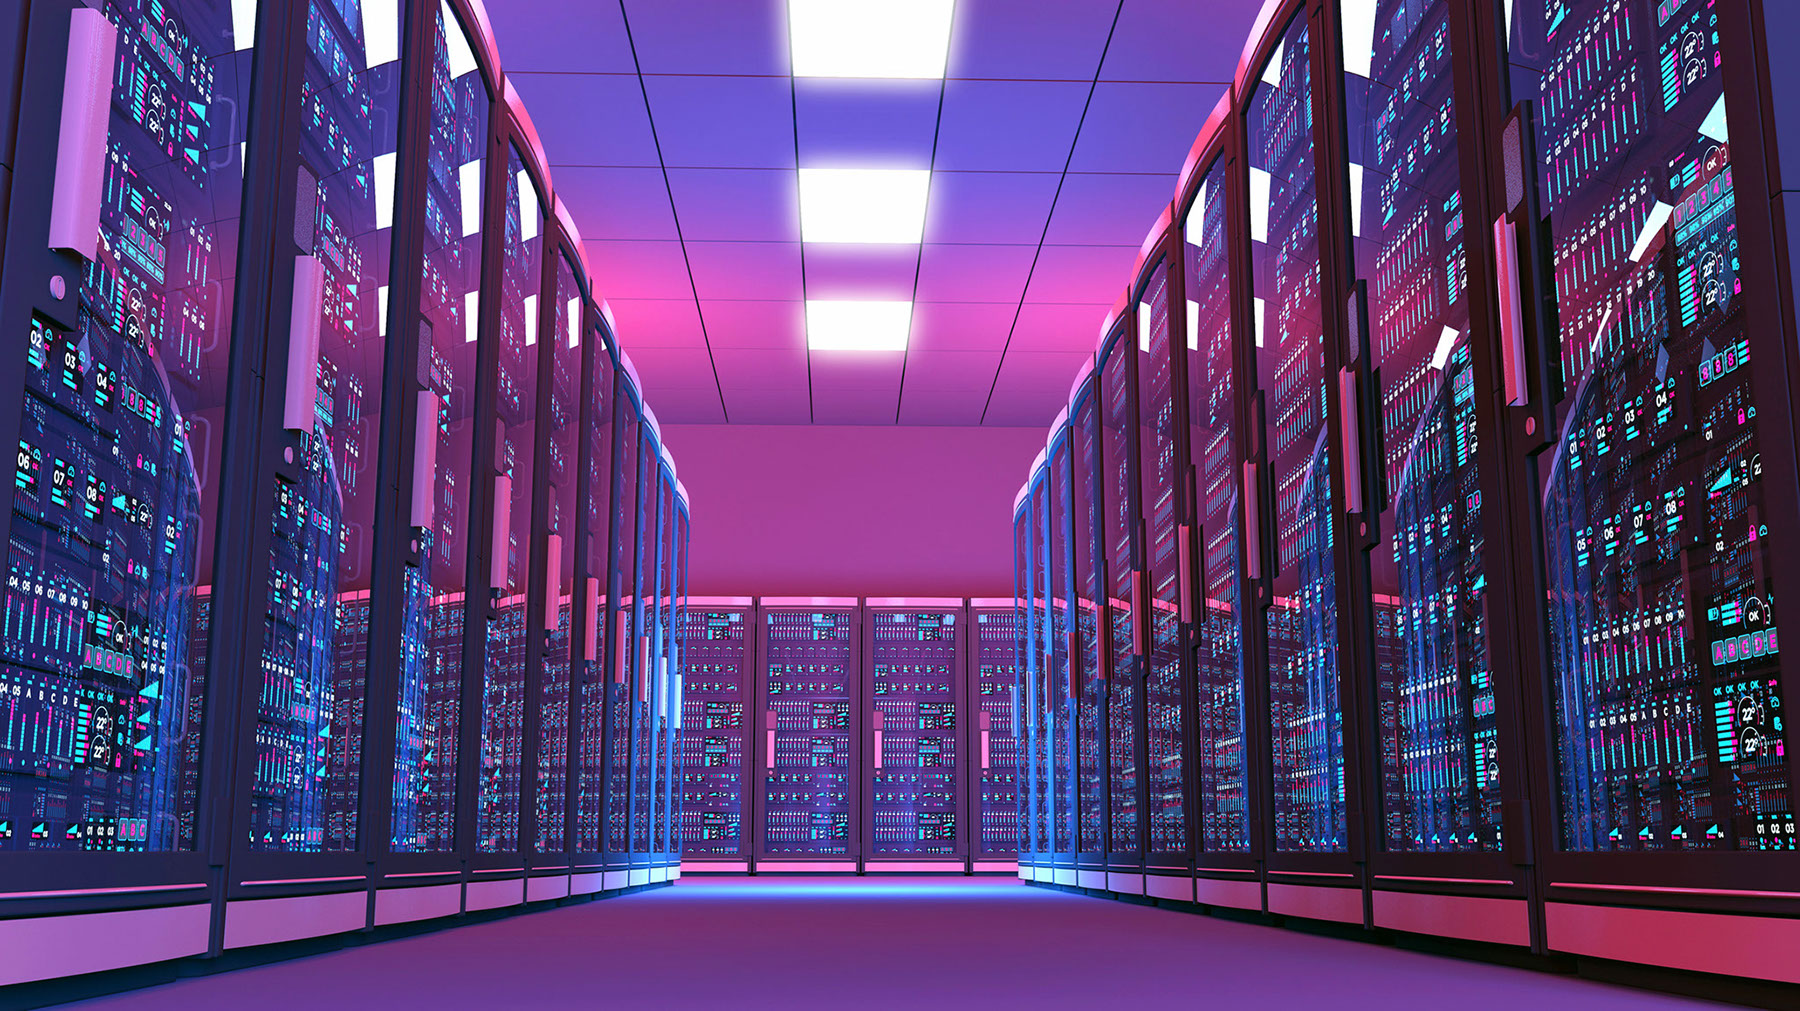 Futuristic data center room, aisle surrounded by rows of servers - LDA